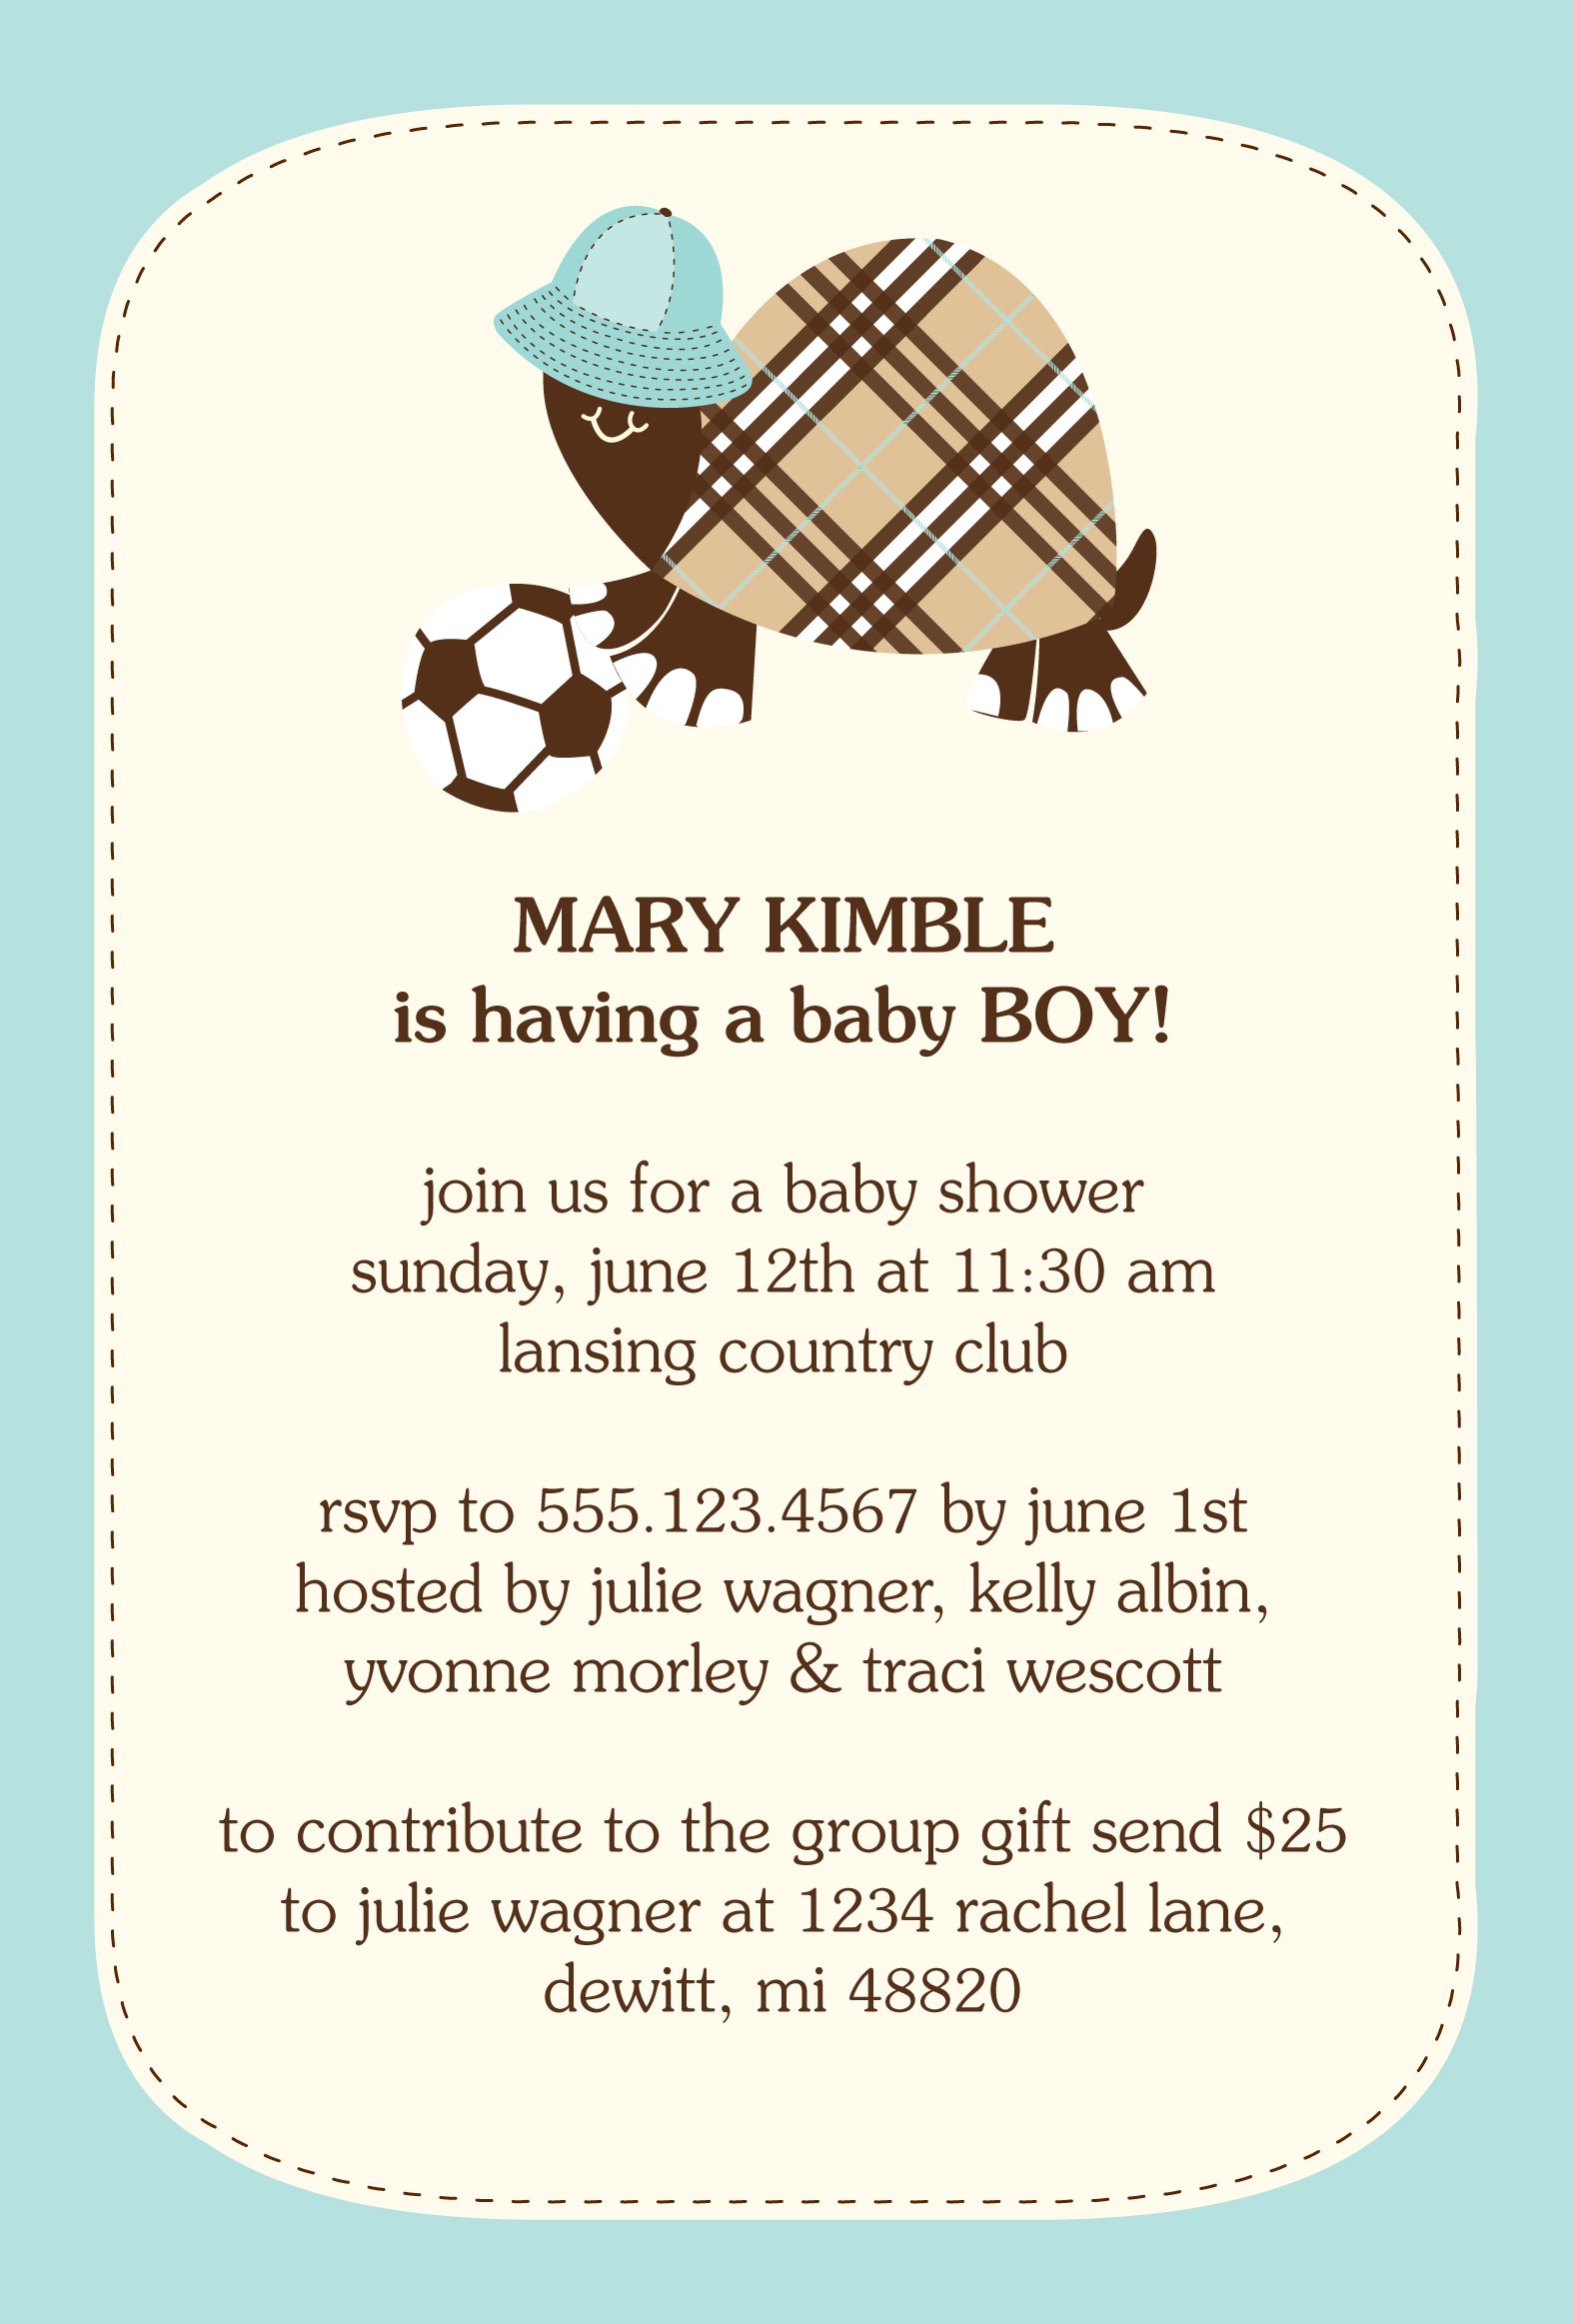 Full Size of Baby Shower:delightful Baby Shower Invitation Wording Picture Designs Baby Shower Halls With Baby Shower At The Park Plus Recuerdos De Baby Shower Together With Fun Baby Shower Games As Well As Baby Shower Hostess Gifts And Baby Shower Verses